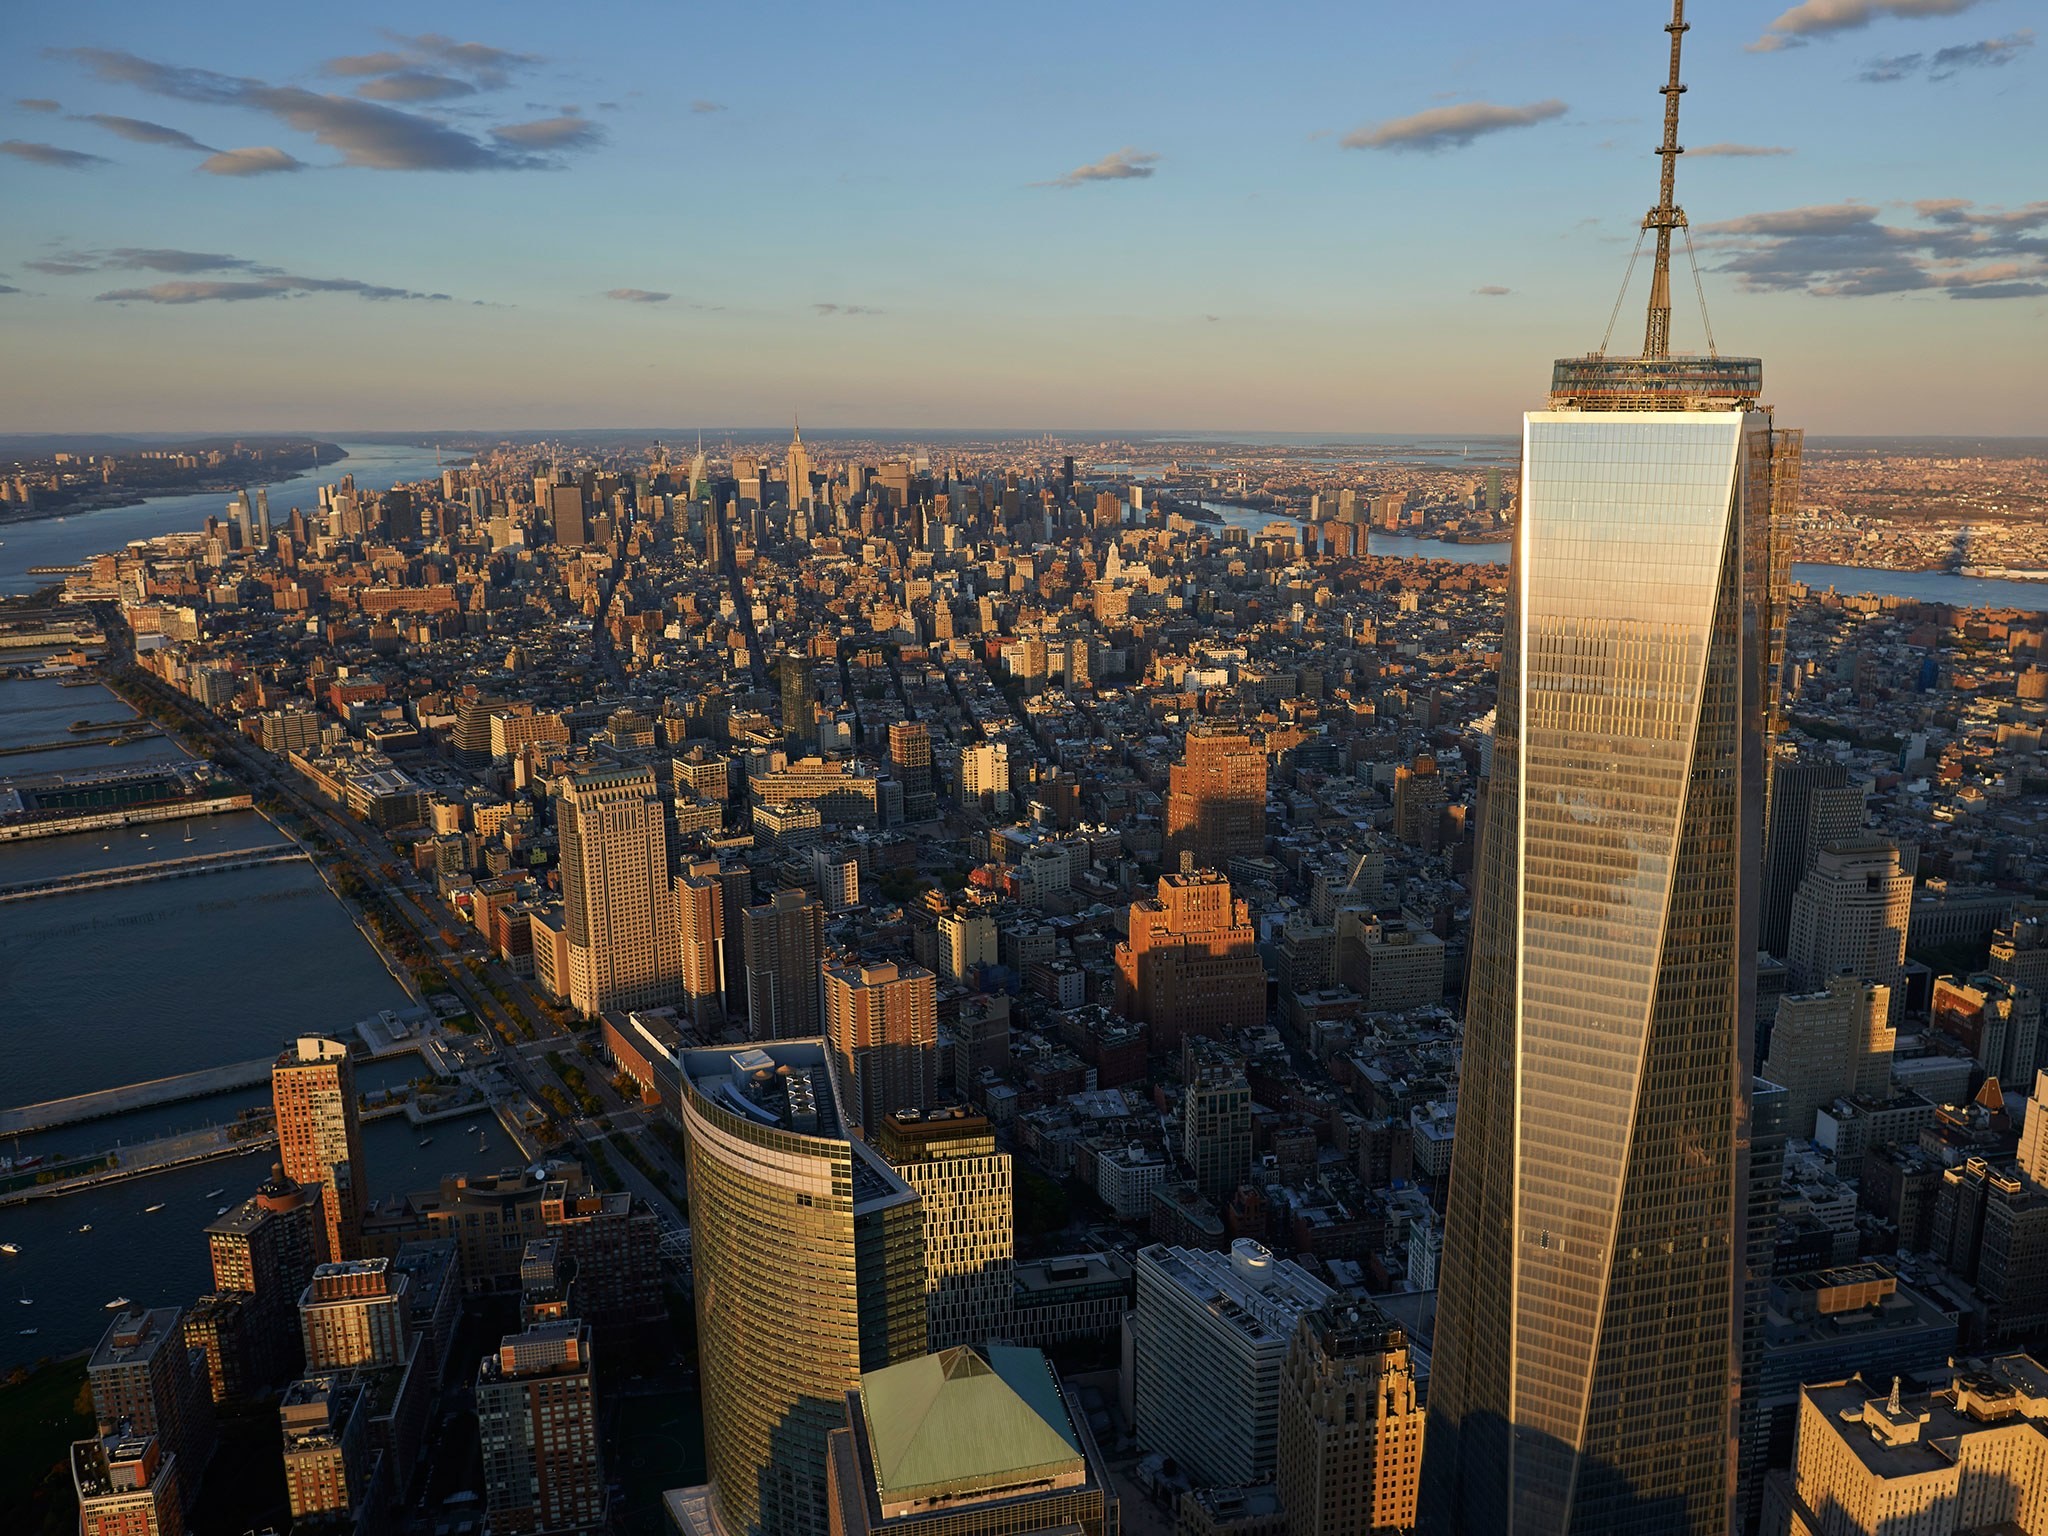 2048x1536 One World Trade Center Observation Deck to Open May 29 - CondÃ© Nast Traveler